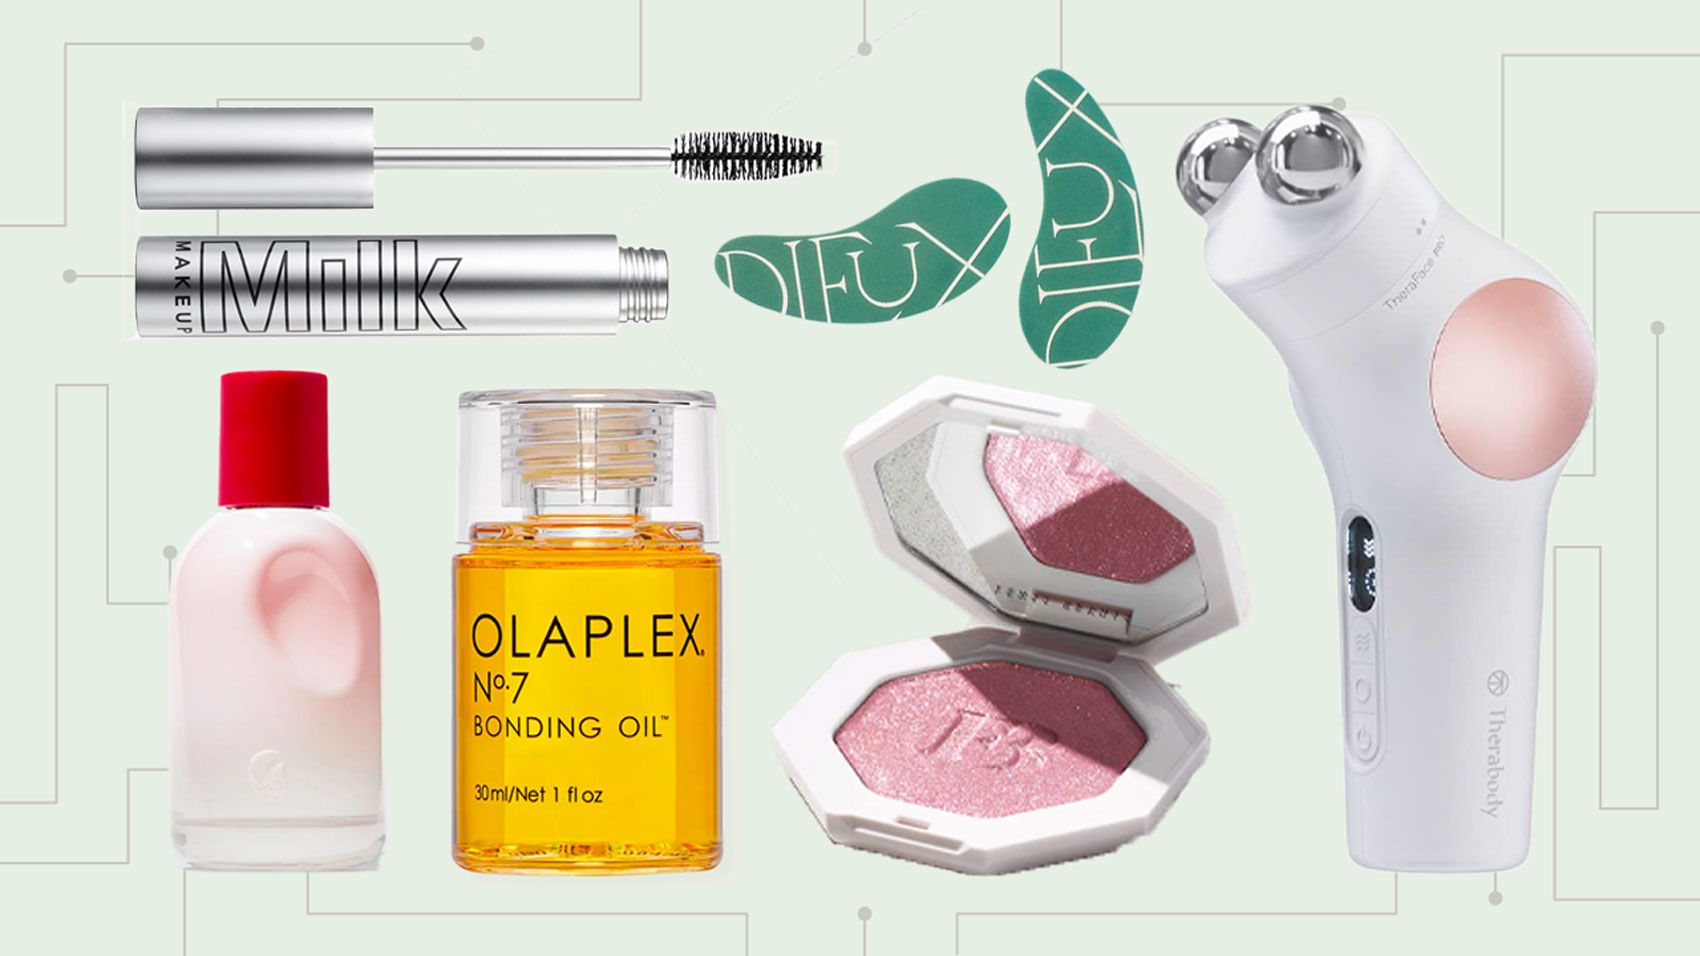 Brighten Up Your Morning With Viral Beauty Brand Bubble's New Eye